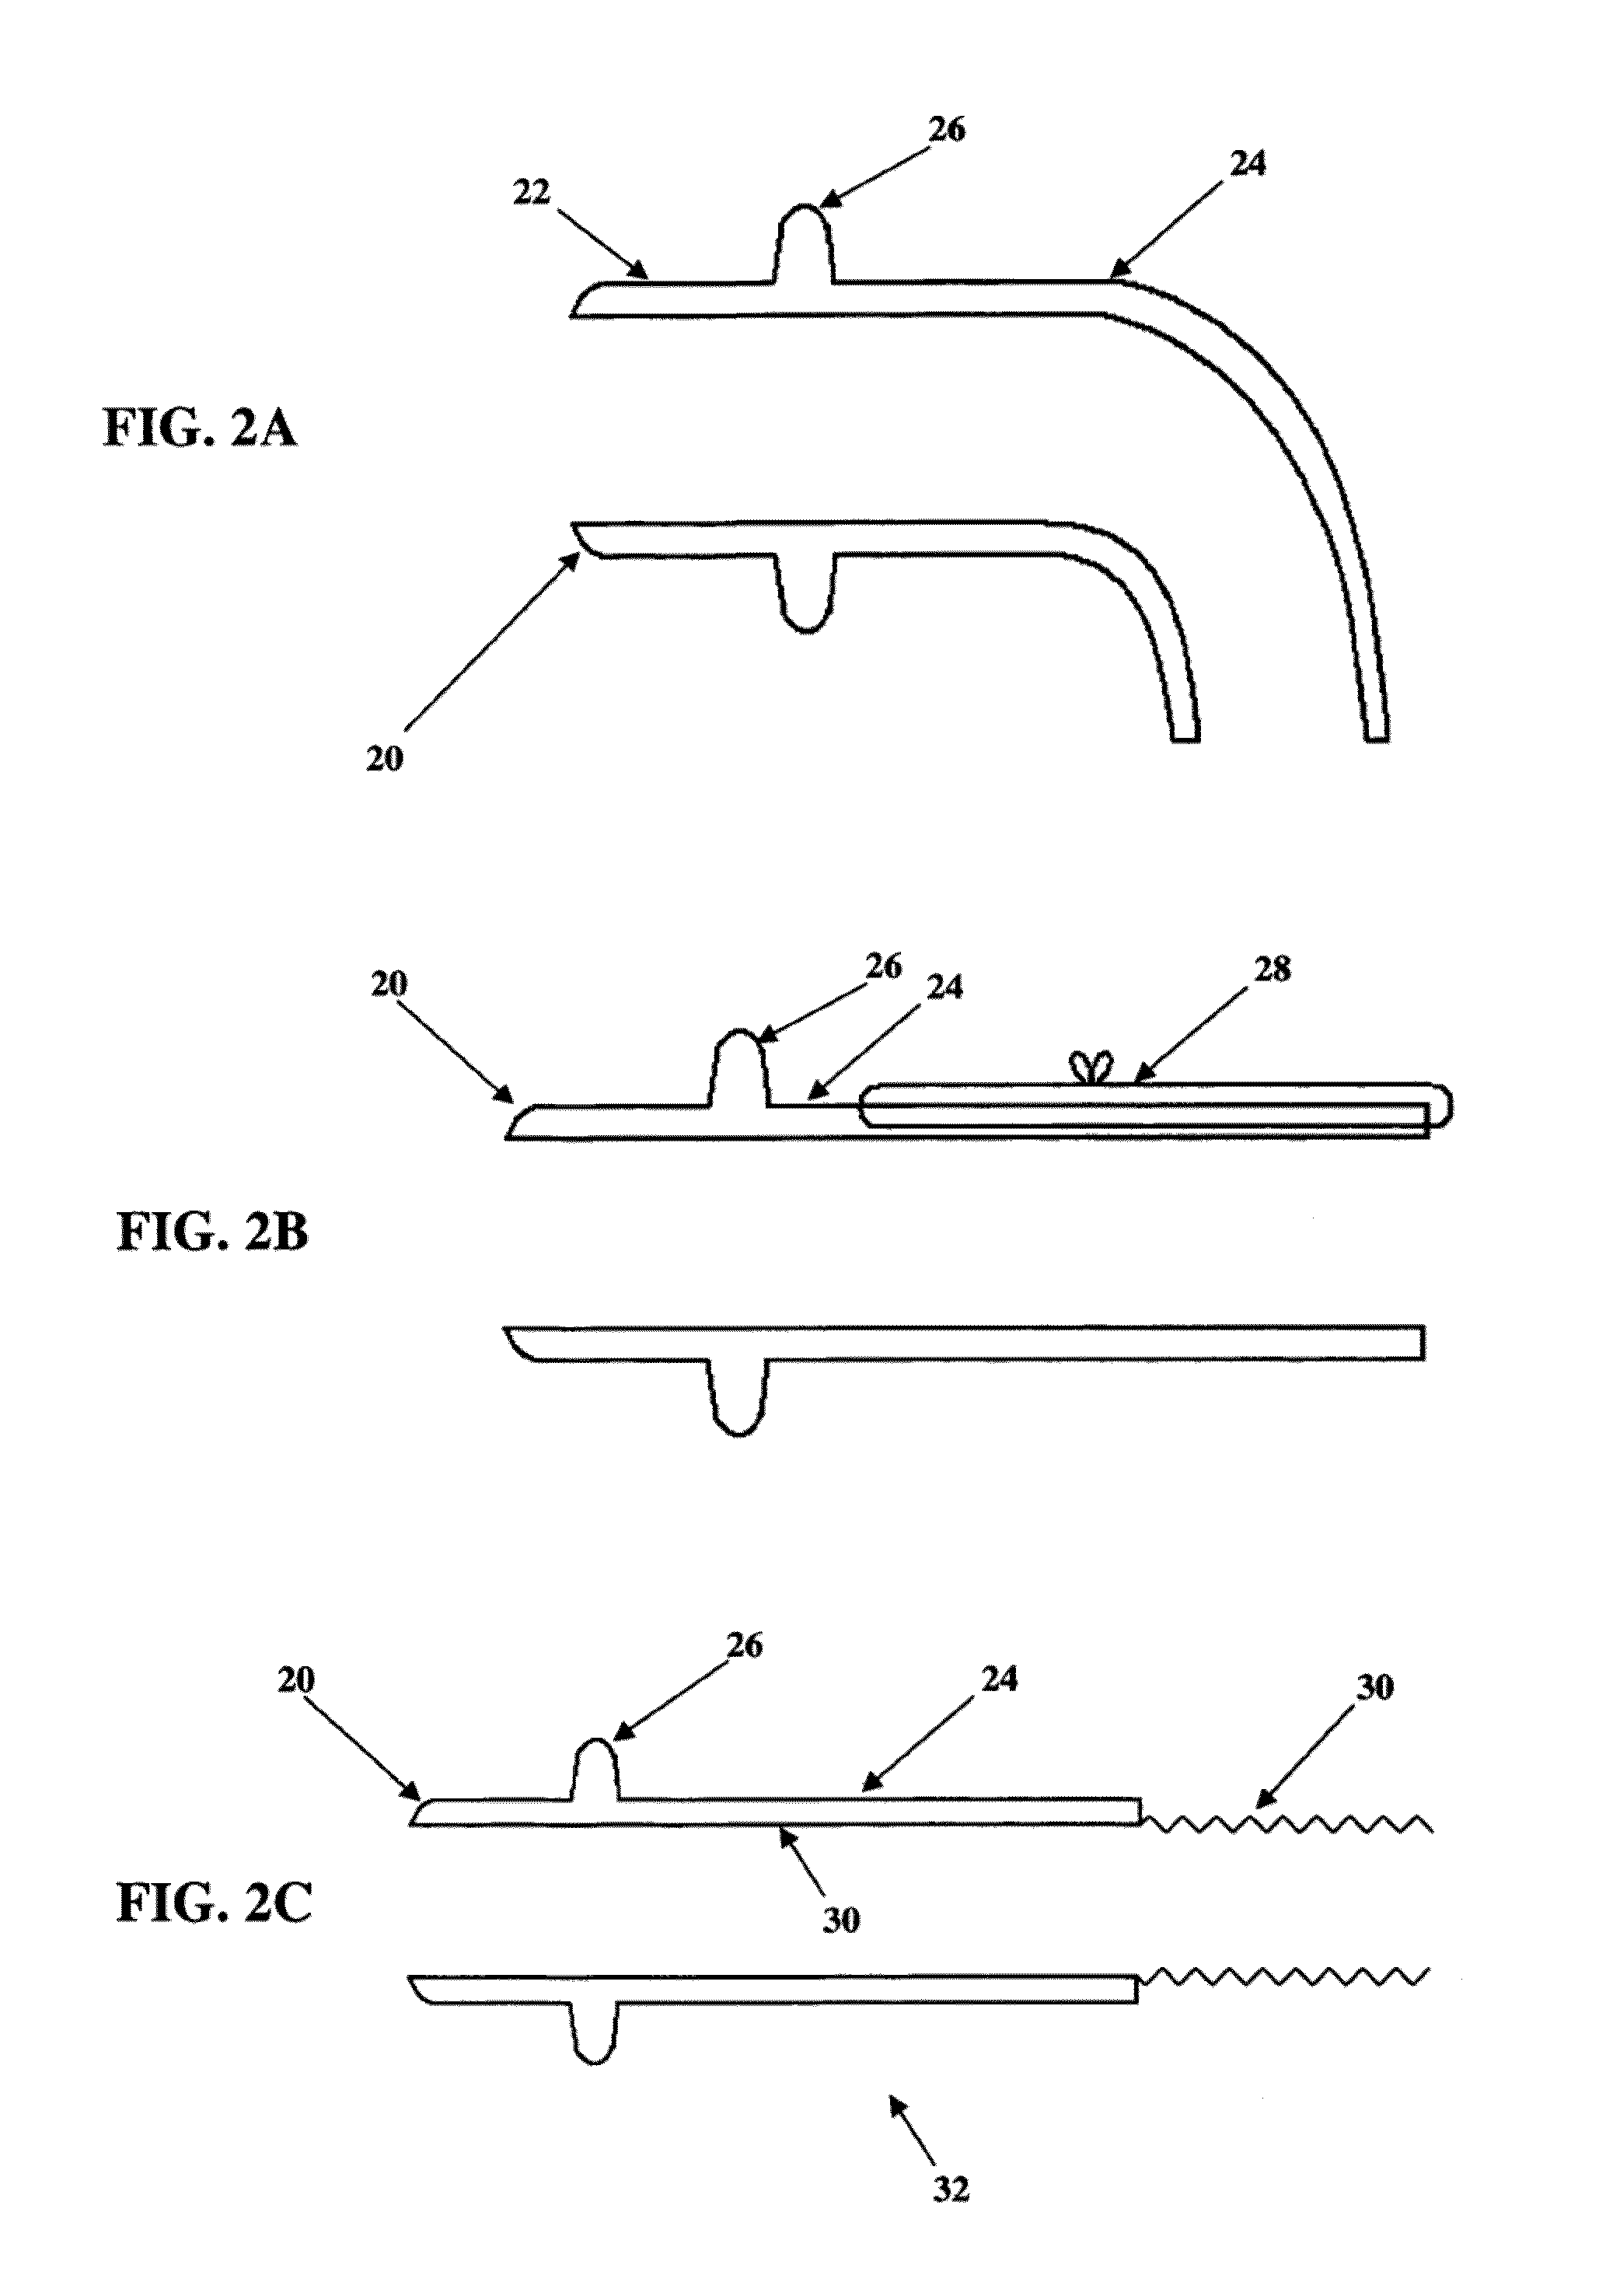 Apparatus and method for forming a hole in a hollow organ, connecting a conduit to the hollow organ and connecting a left ventricular assist device (LVAD) to the hollow organ